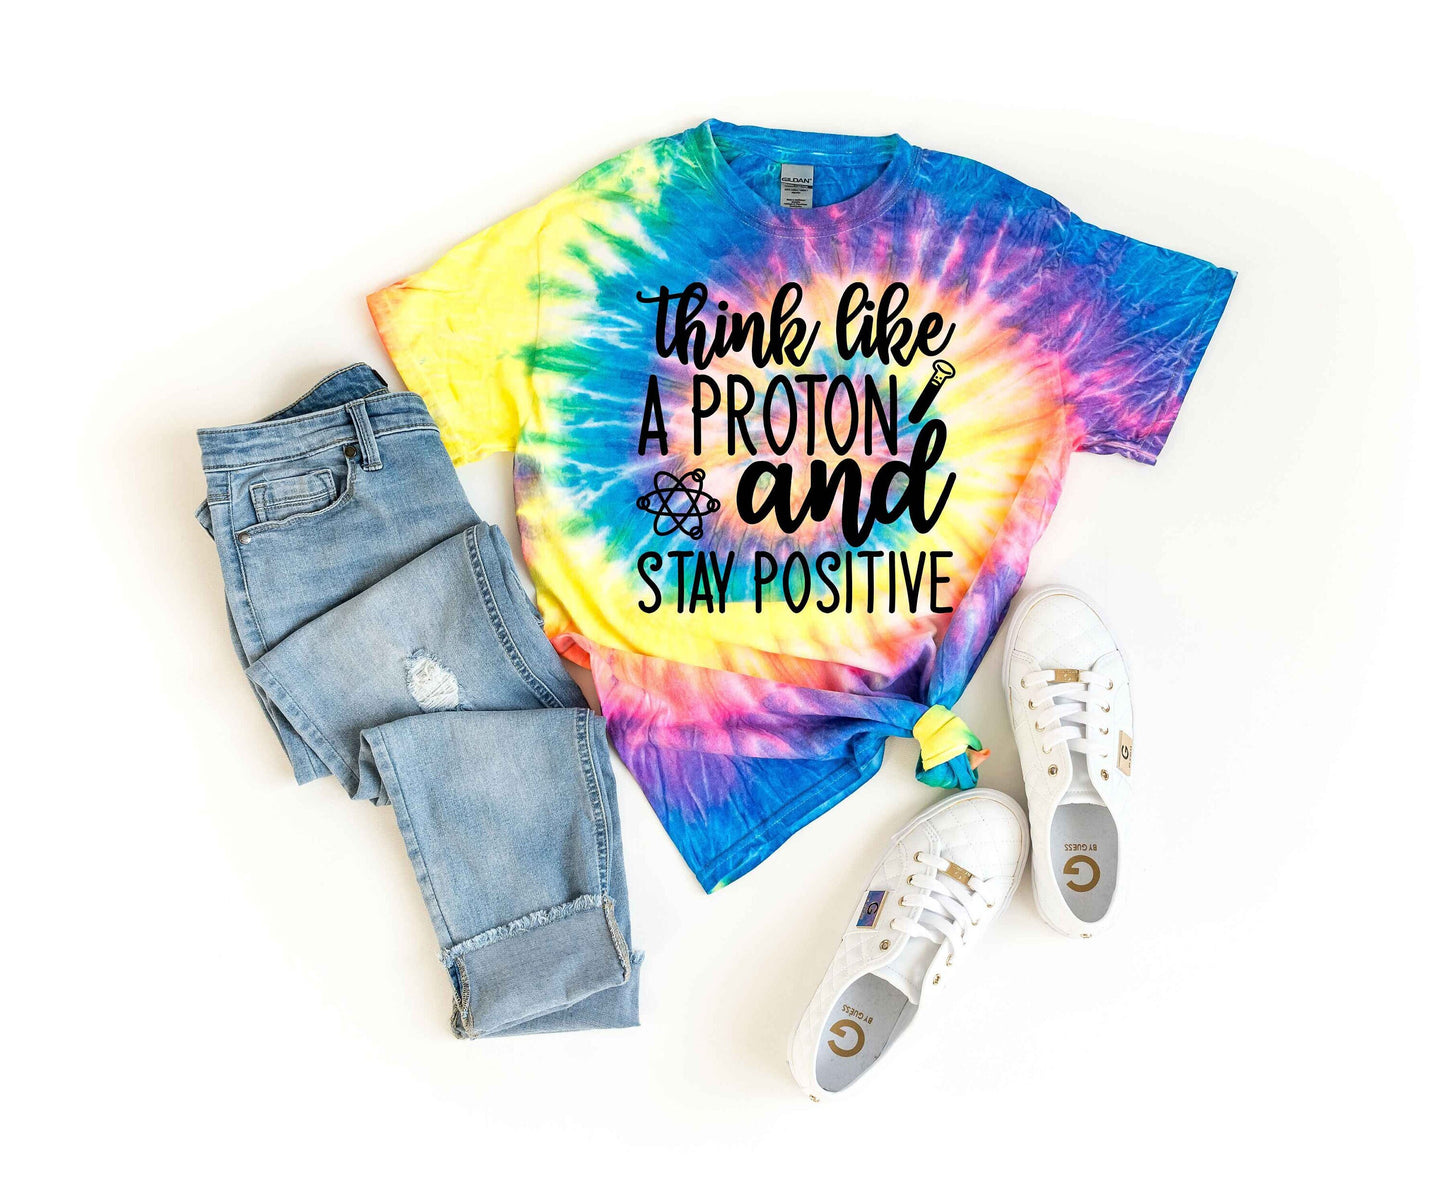 Think Like a Proton And Stay Positive Tie Dye Shirt - Science Shirt - Chemistry Shirt - Science Tee - Science Teacher Shirt